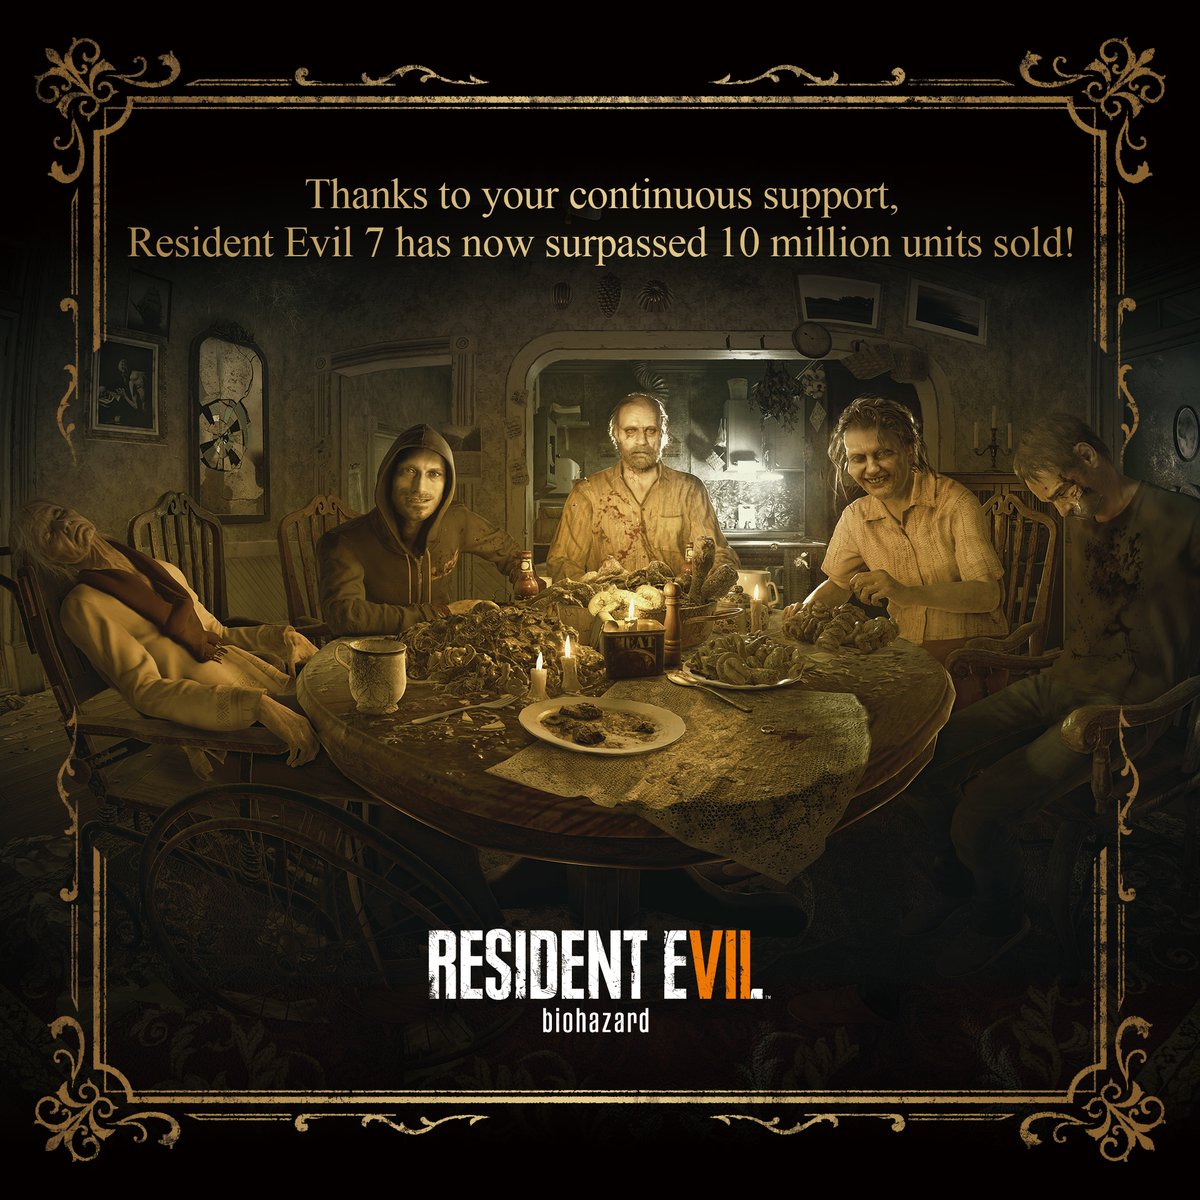 At GDC 2021, you can learn about the making of Resident Evil